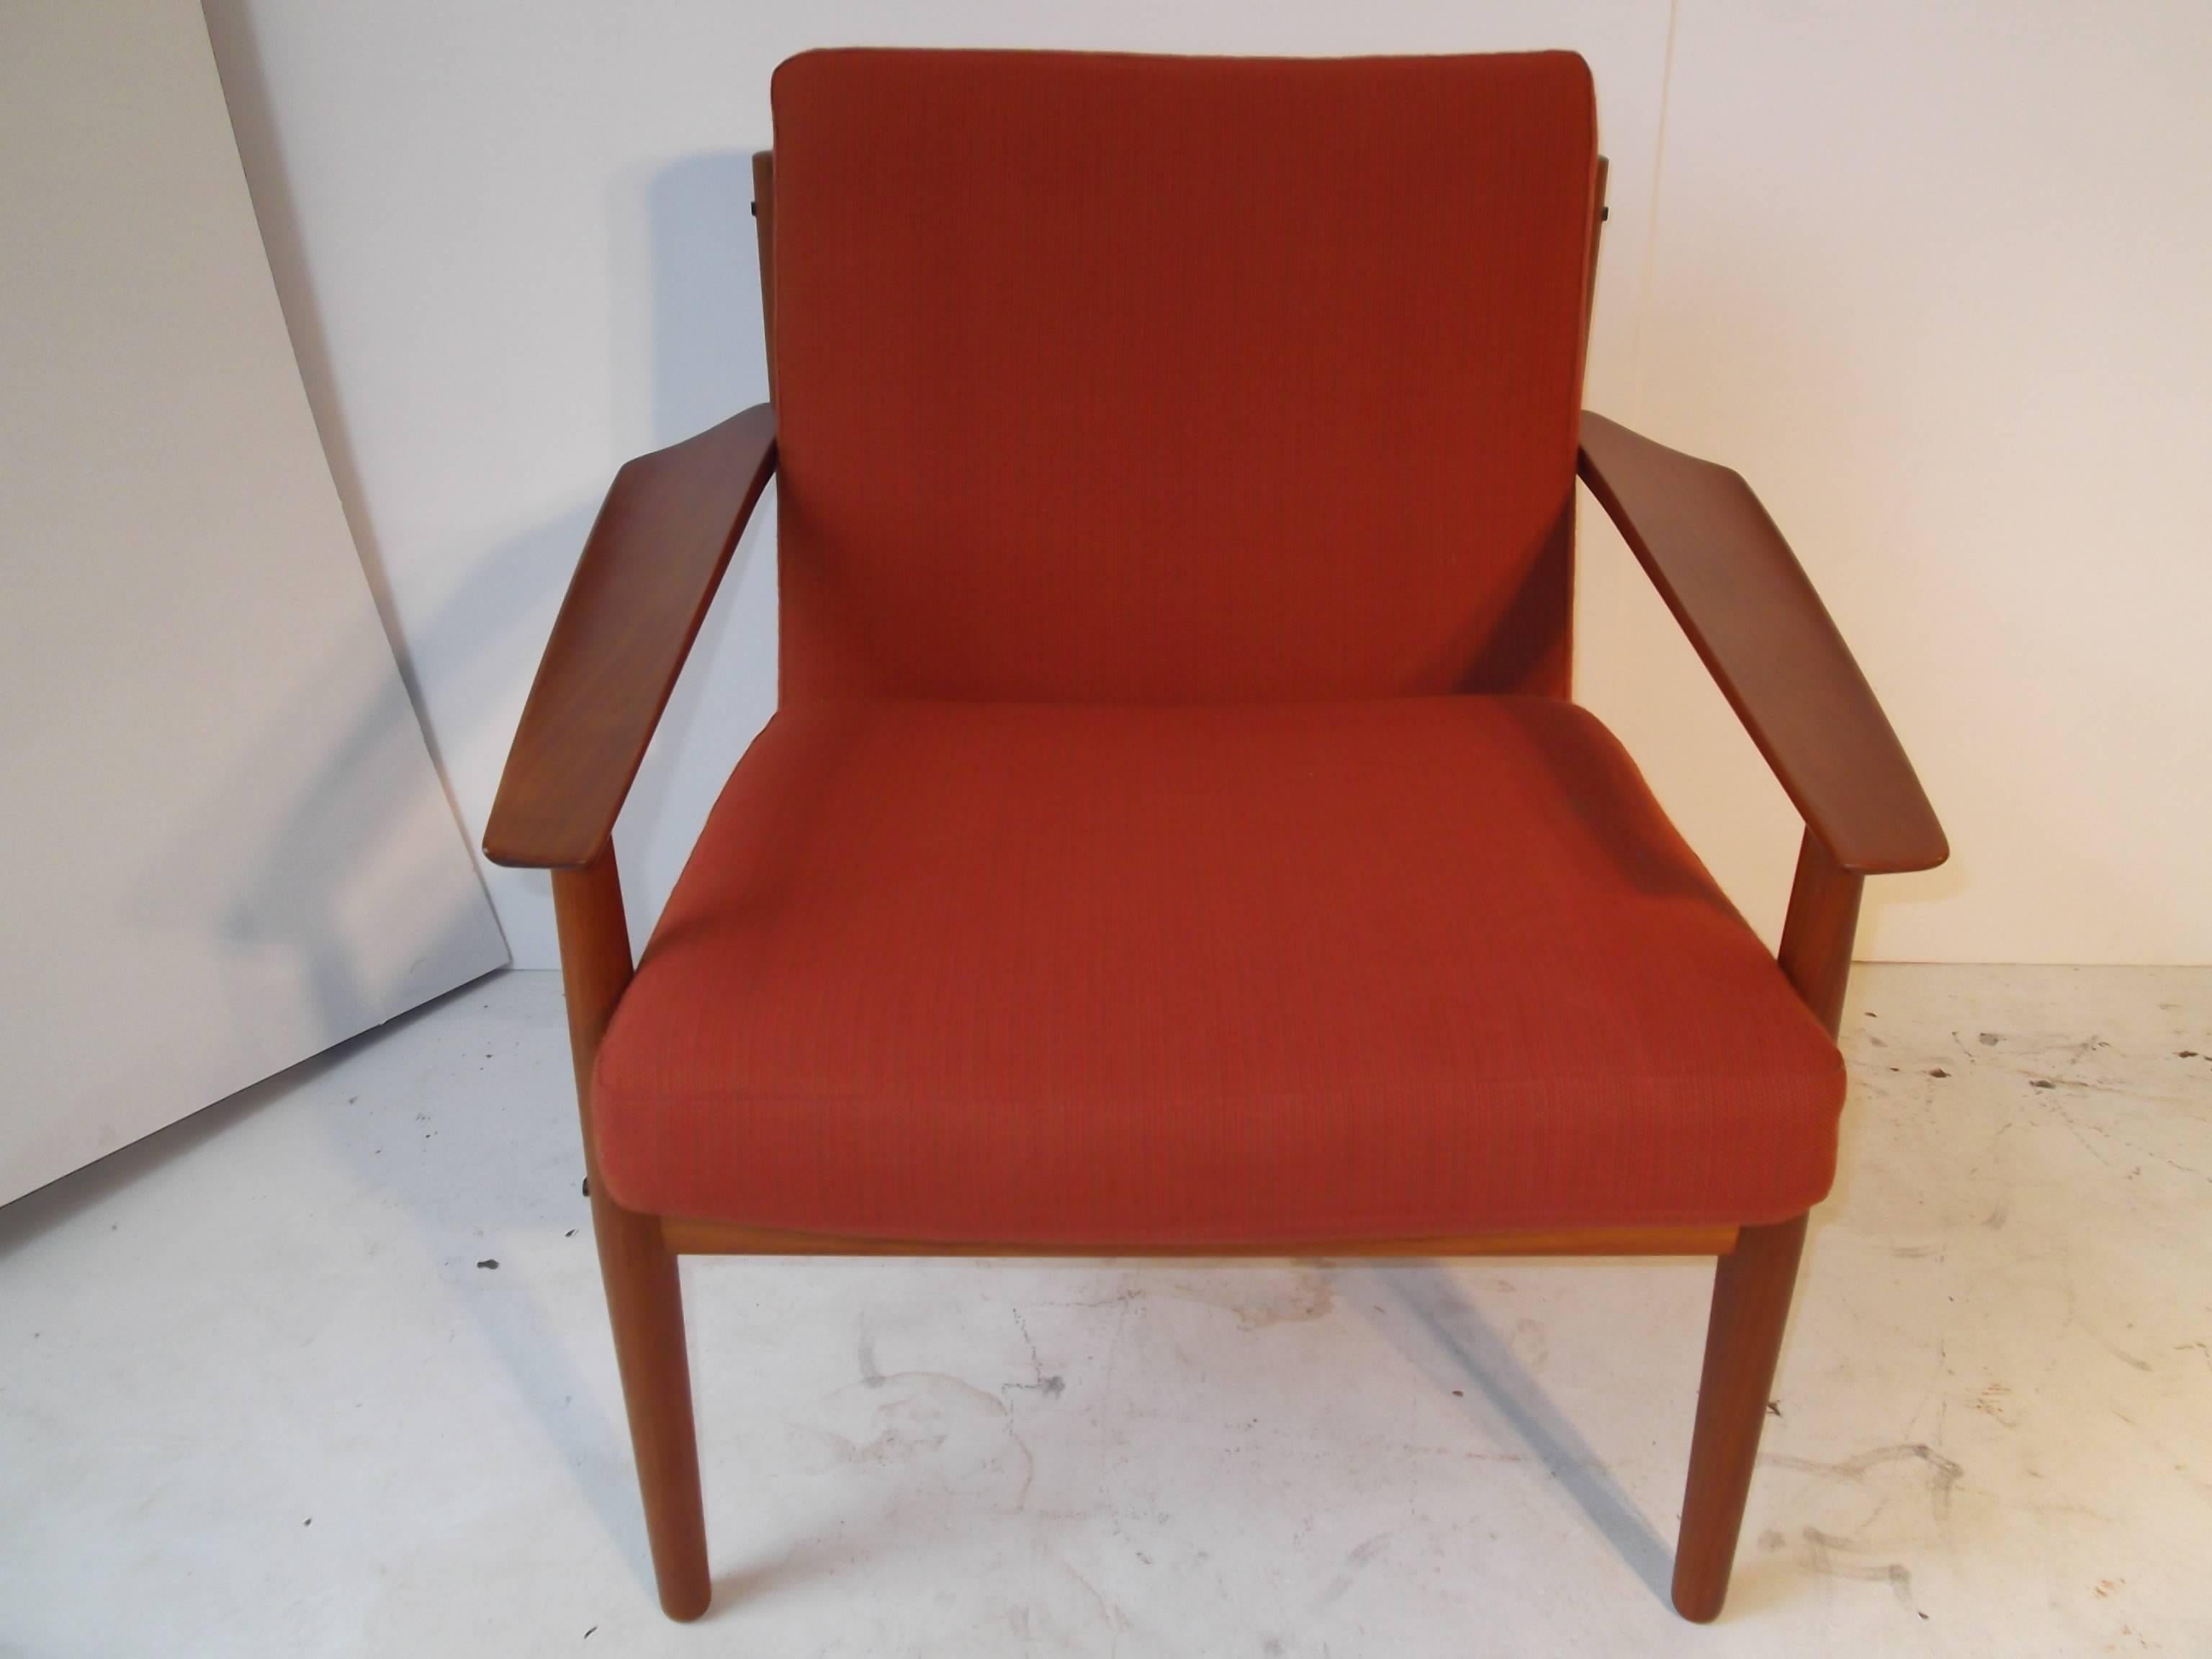 Wonderful design solid teak, Danish modern armchair, designed by Arne Vodder for Glostrup Mobelfabrik. It is in original burnt orange woven wool that has been newly refoamed. The arms are concave front to back more pronounced at the winged out